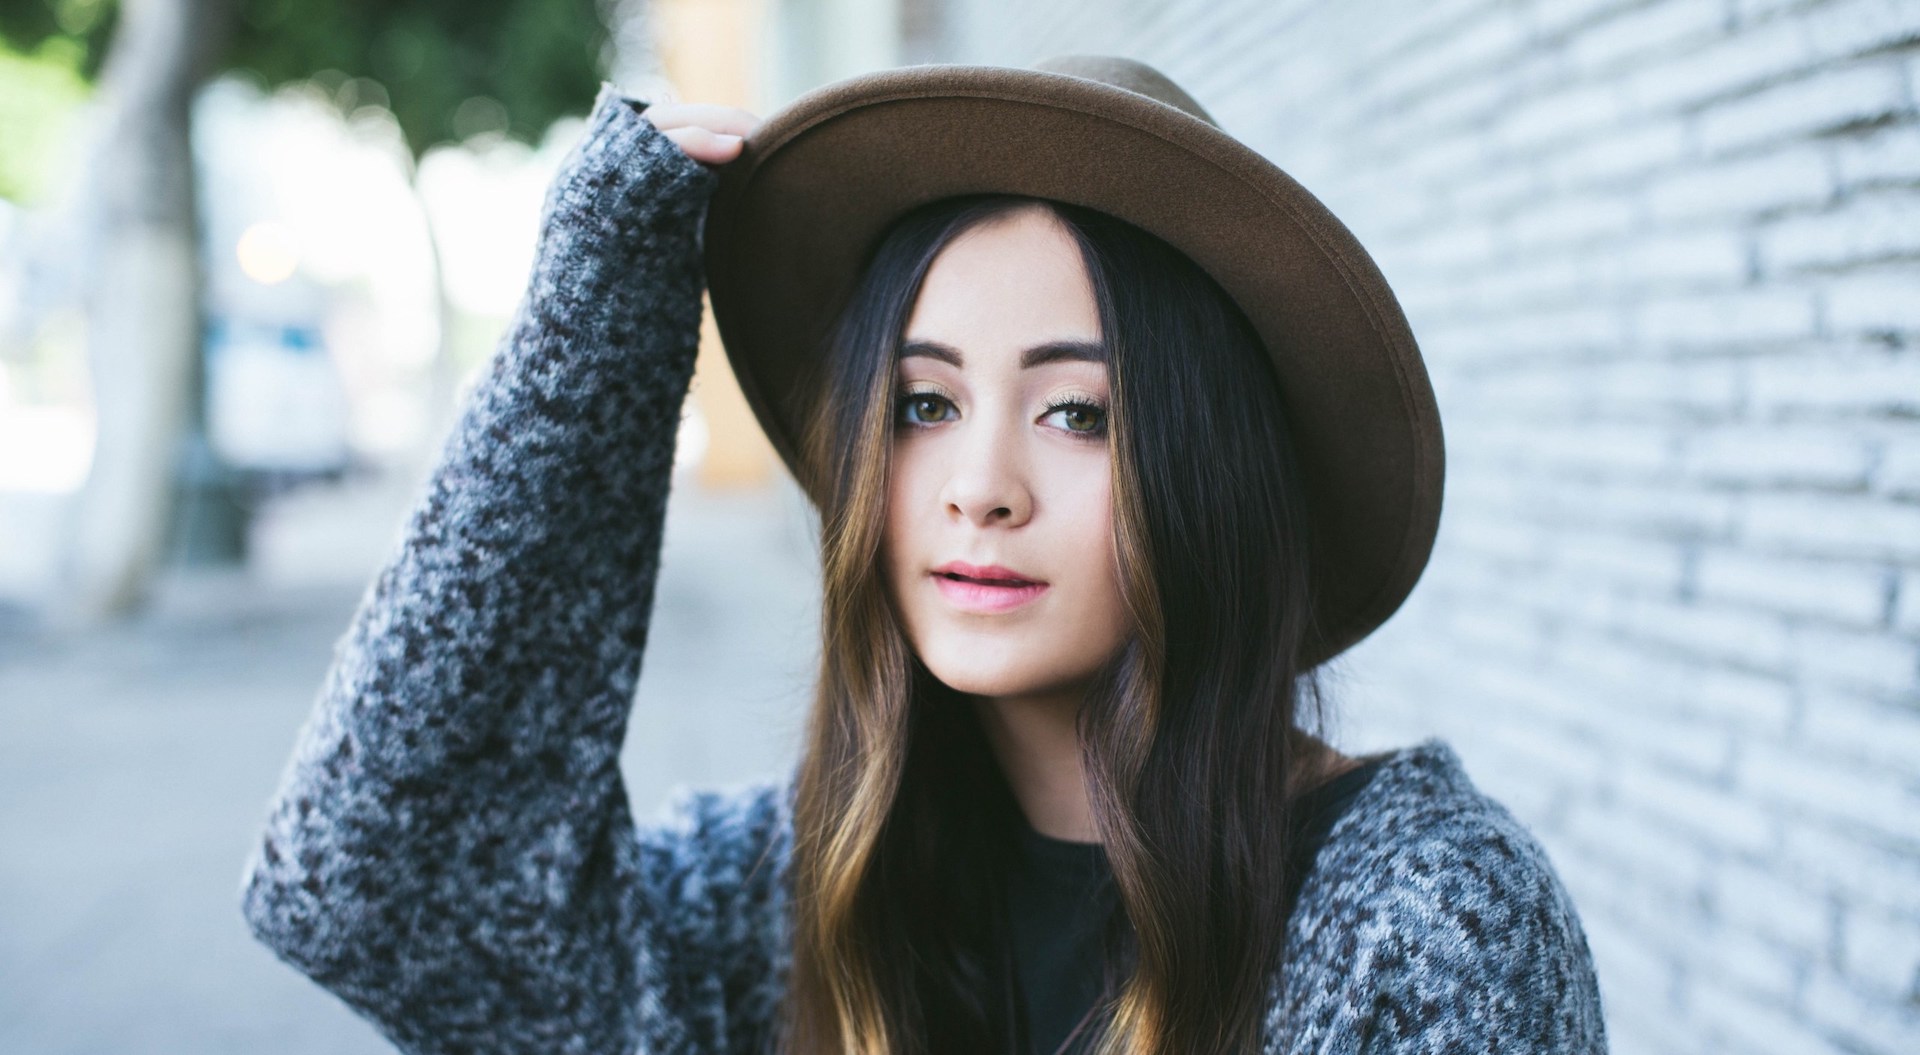 Top TV Song Last Week: This Year's Love by Jasmine Thompson - Tunefind